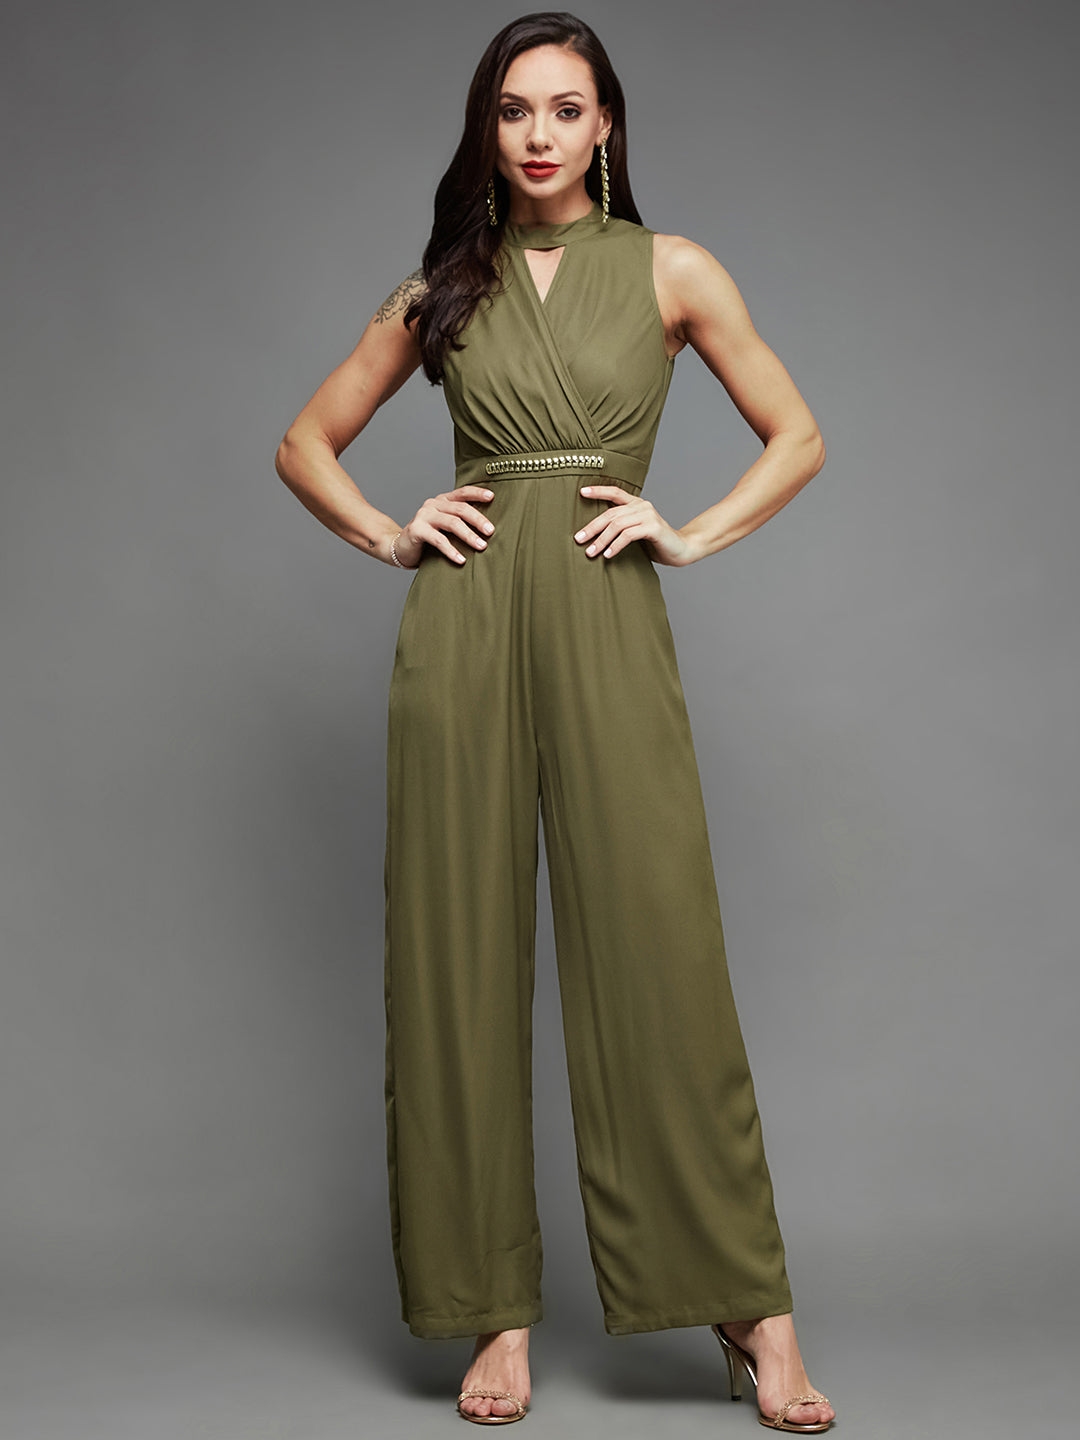 MISS CHASE | Women's Green Crepe  Jumpsuits